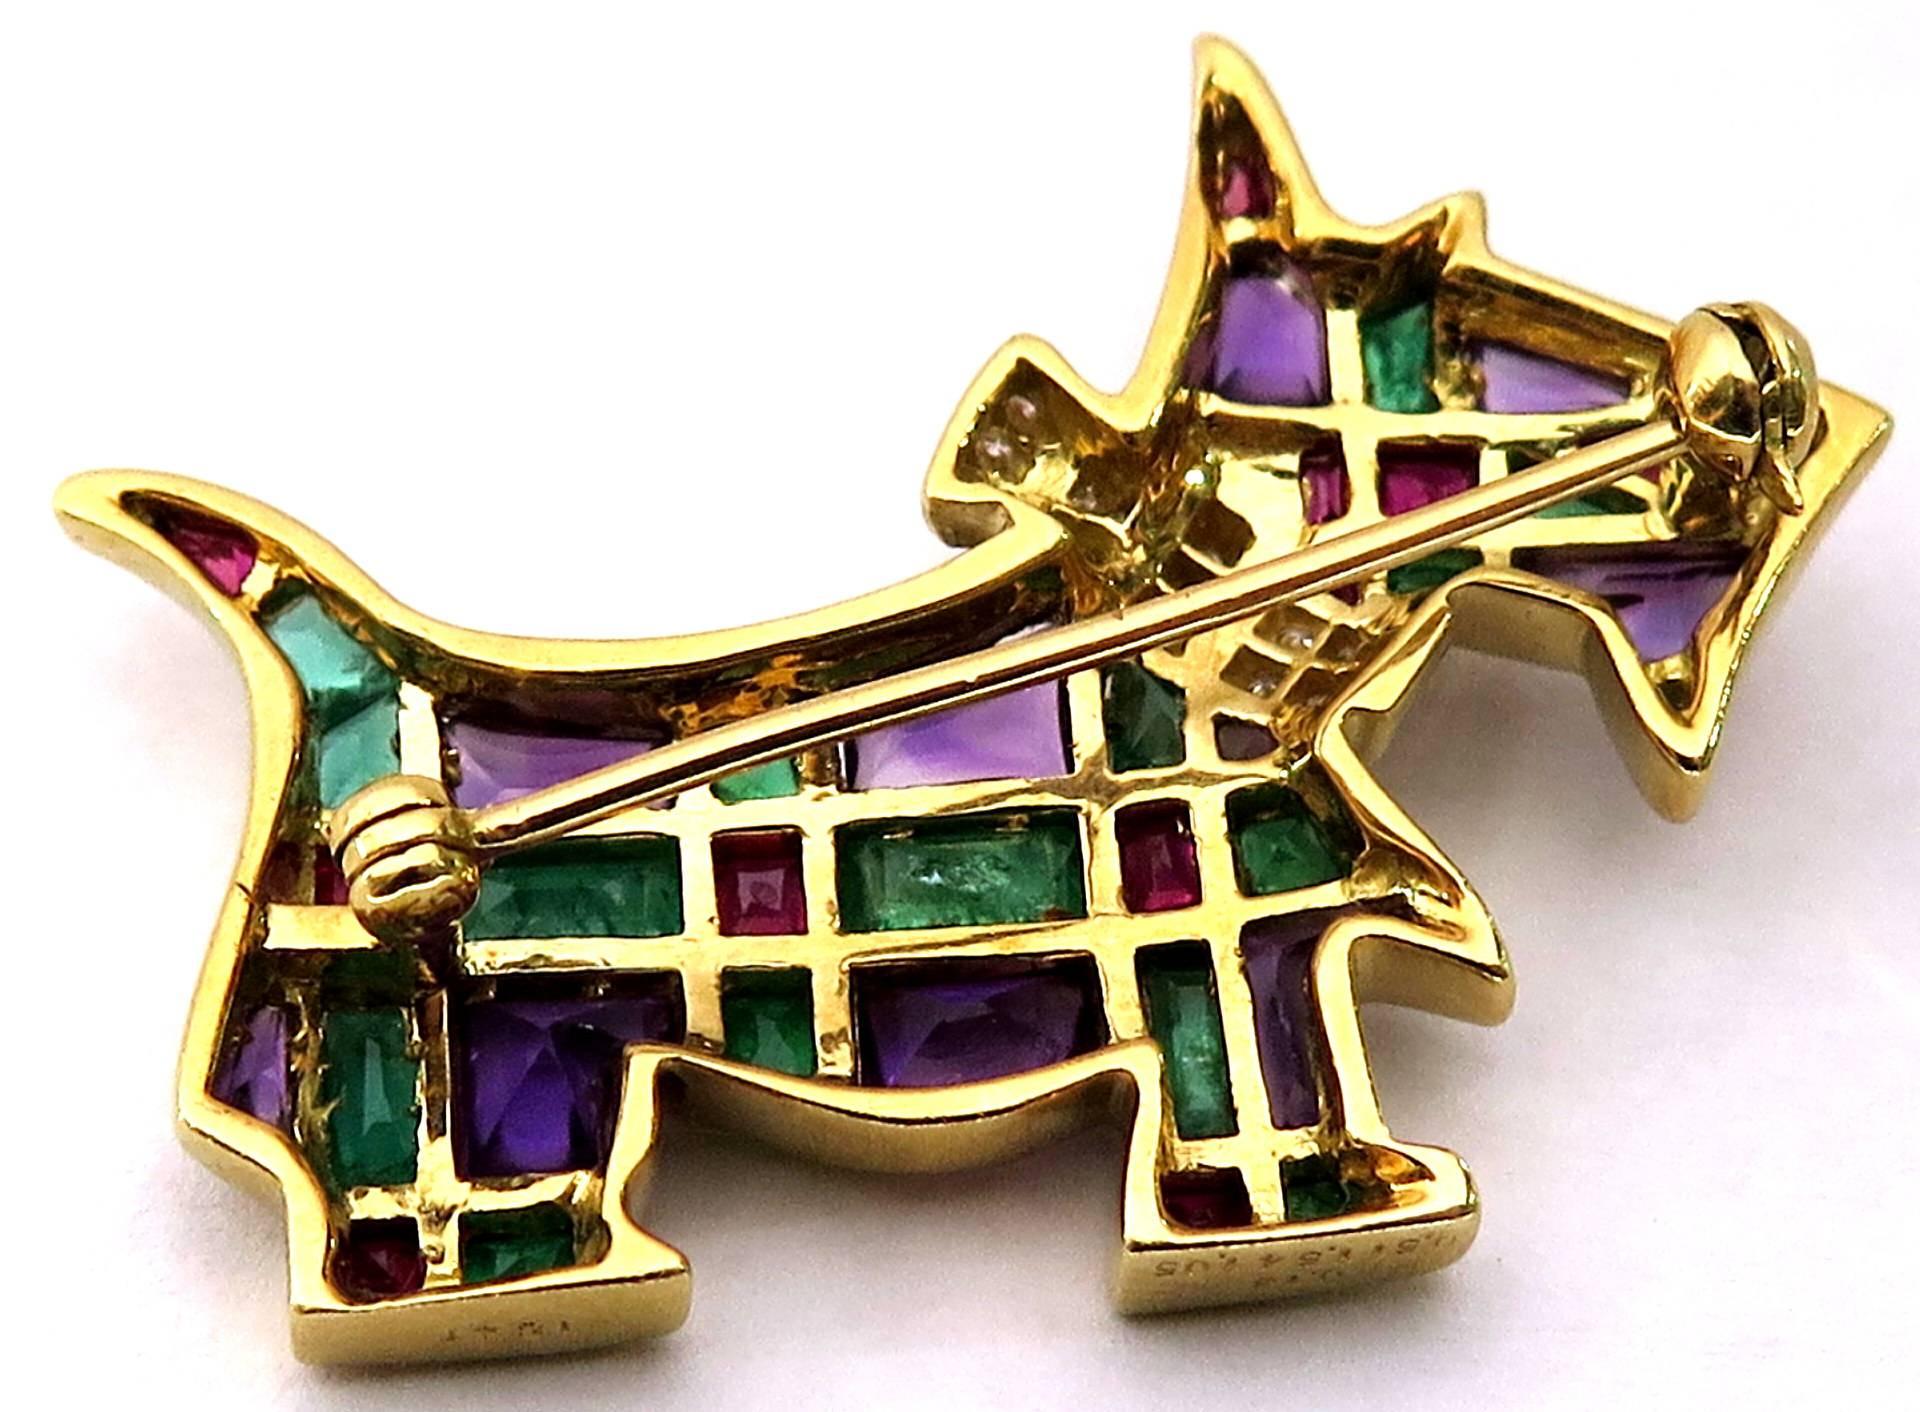 Women's or Men's Timeless Scottie Dog Diamond and Gemstone Gold Pin Looking For Forever Home For Sale